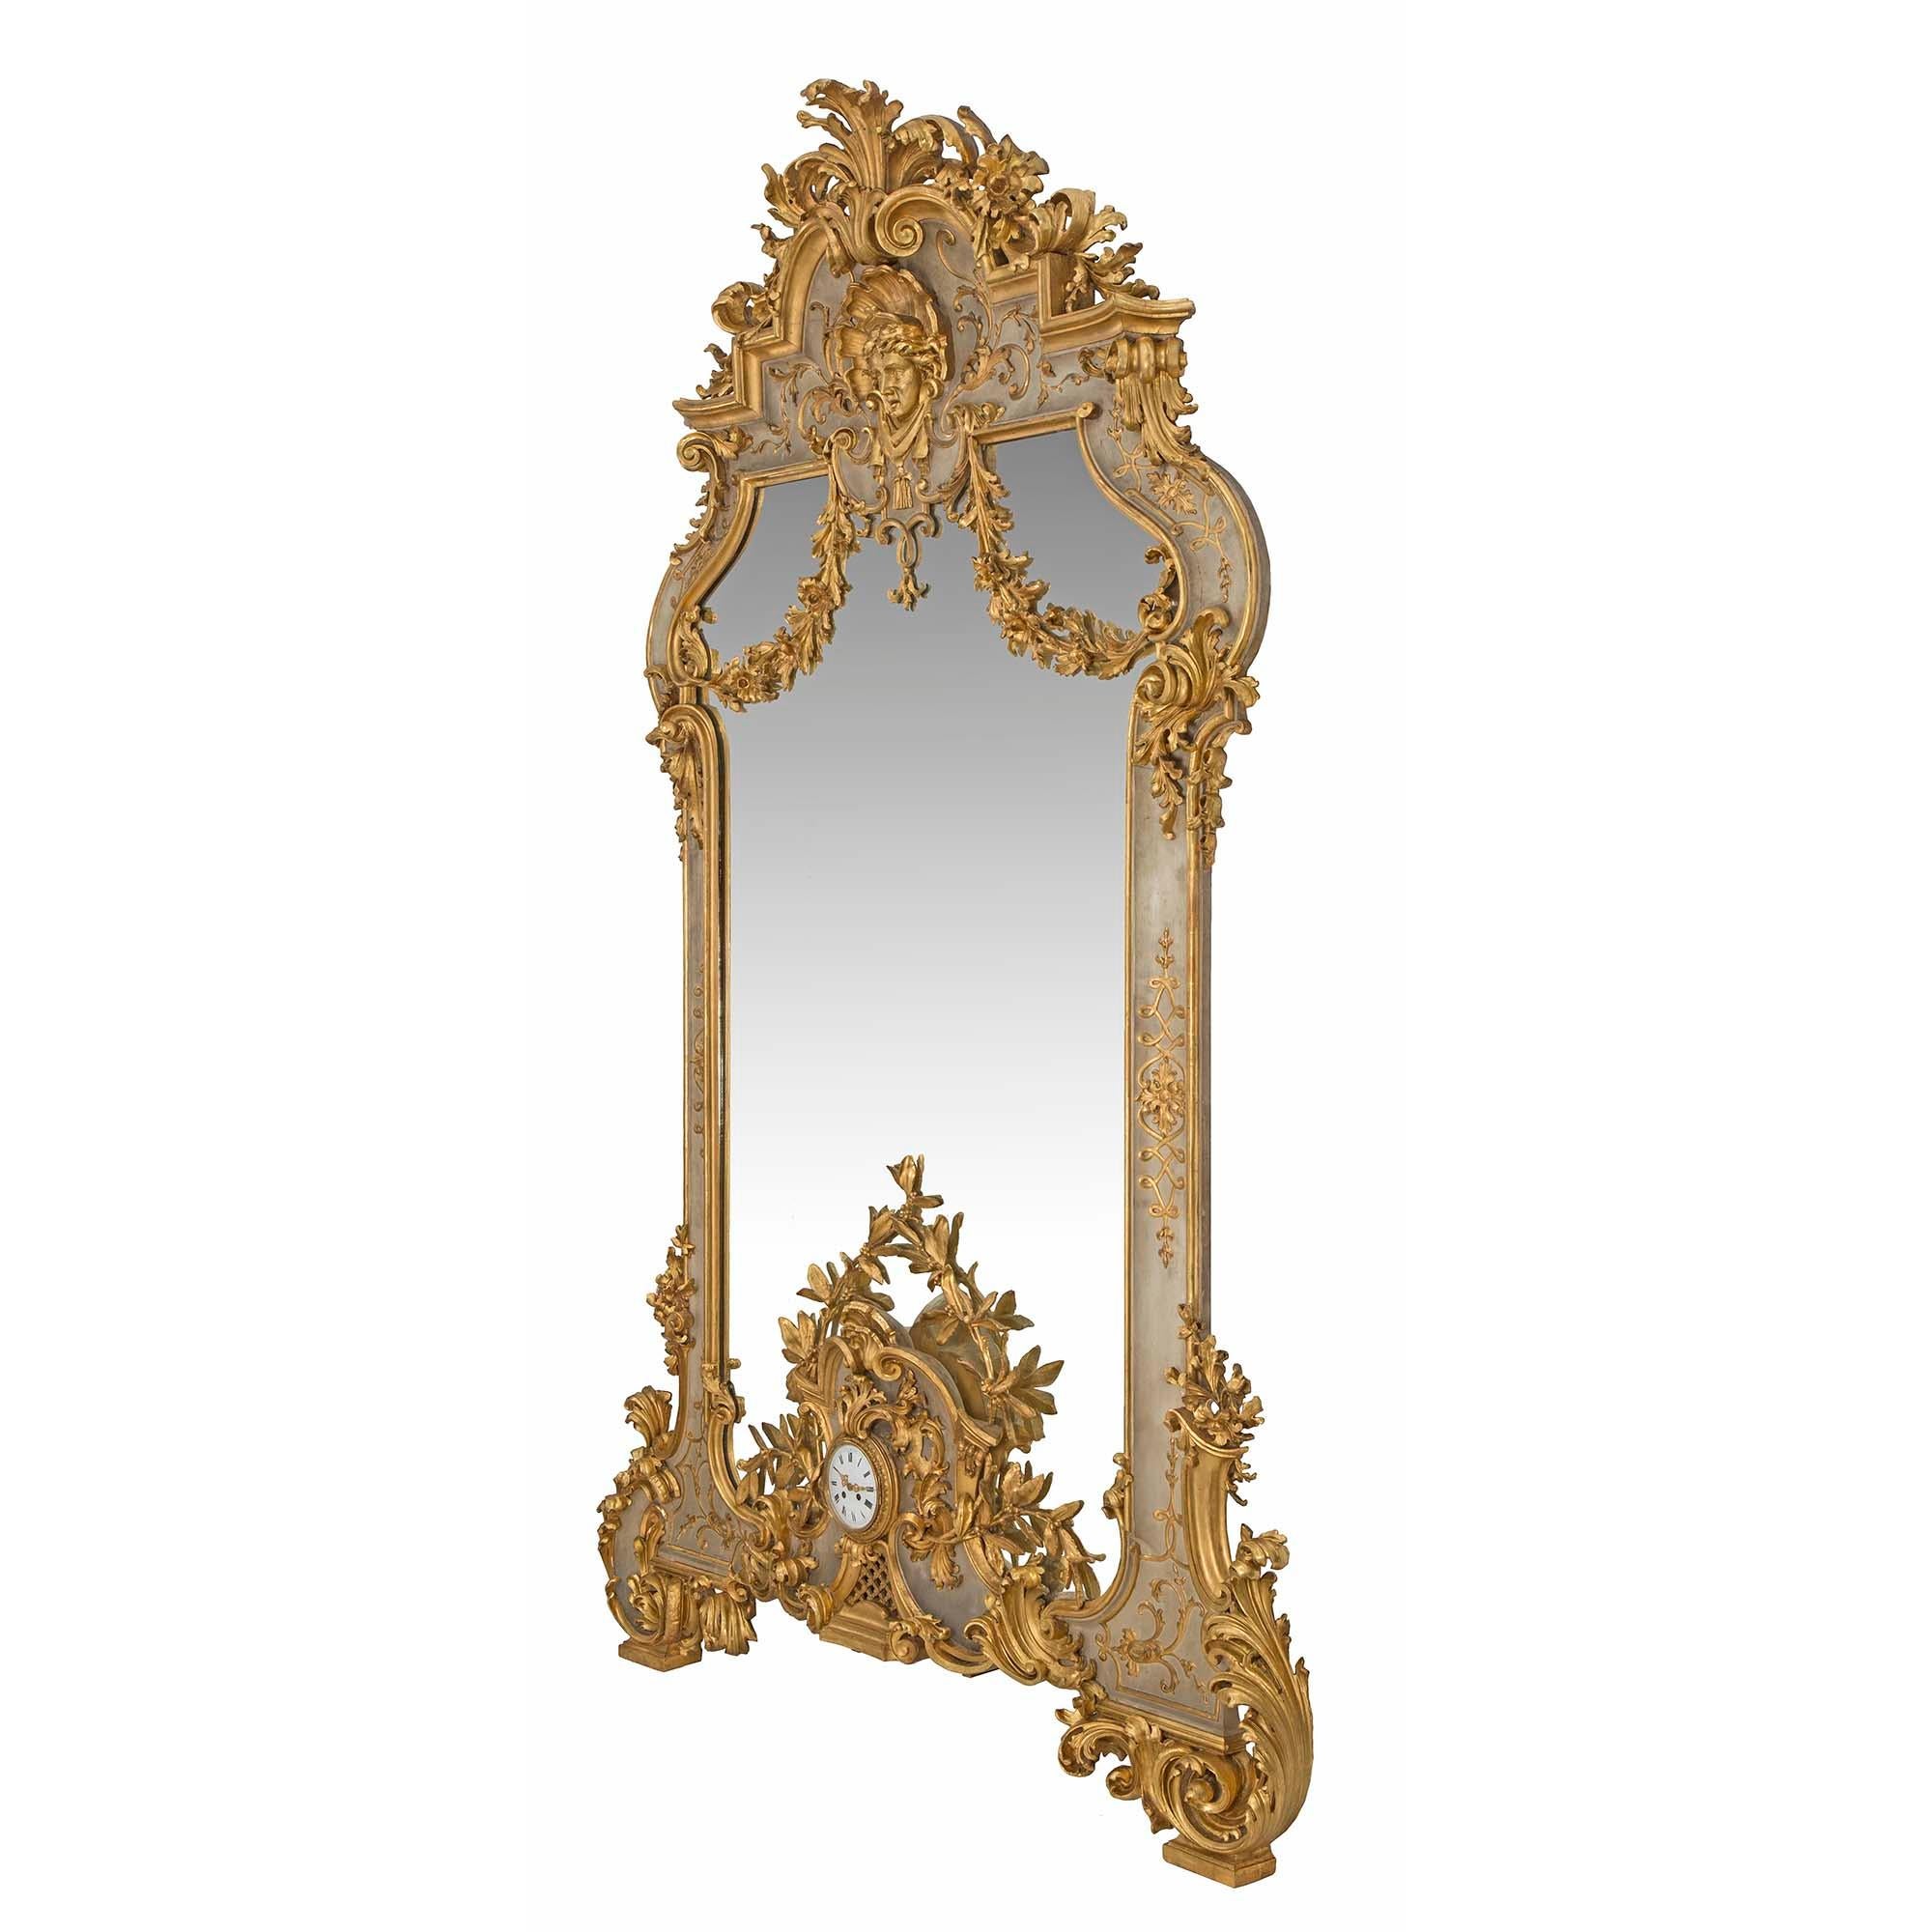 A monumental and extremely rare Italian mid 19th century Louis XV st. patinated and giltwood mirror with its own incorporated clock. Raised on giltwood feet with large opulent giltwood acanthus leaf scrolled at each side. Centered on the patinated